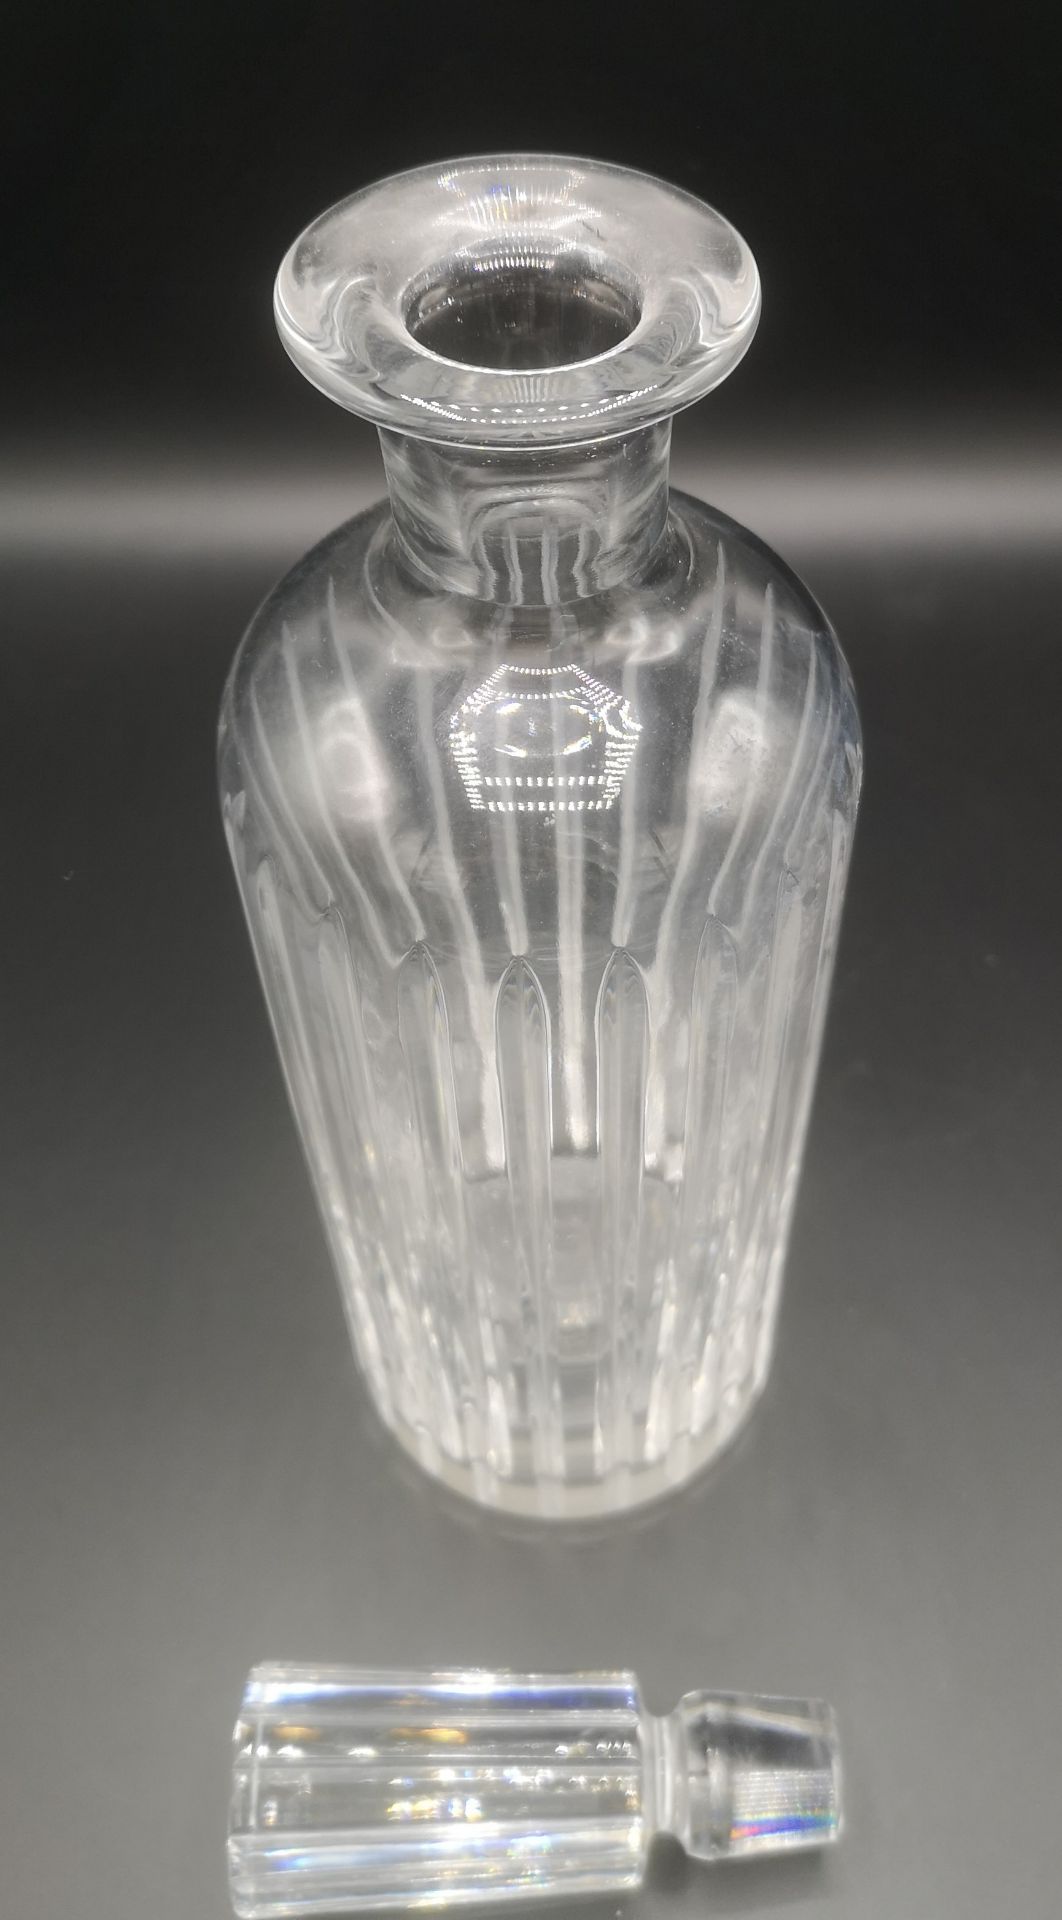 Baccarat glass decanter - Image 3 of 5